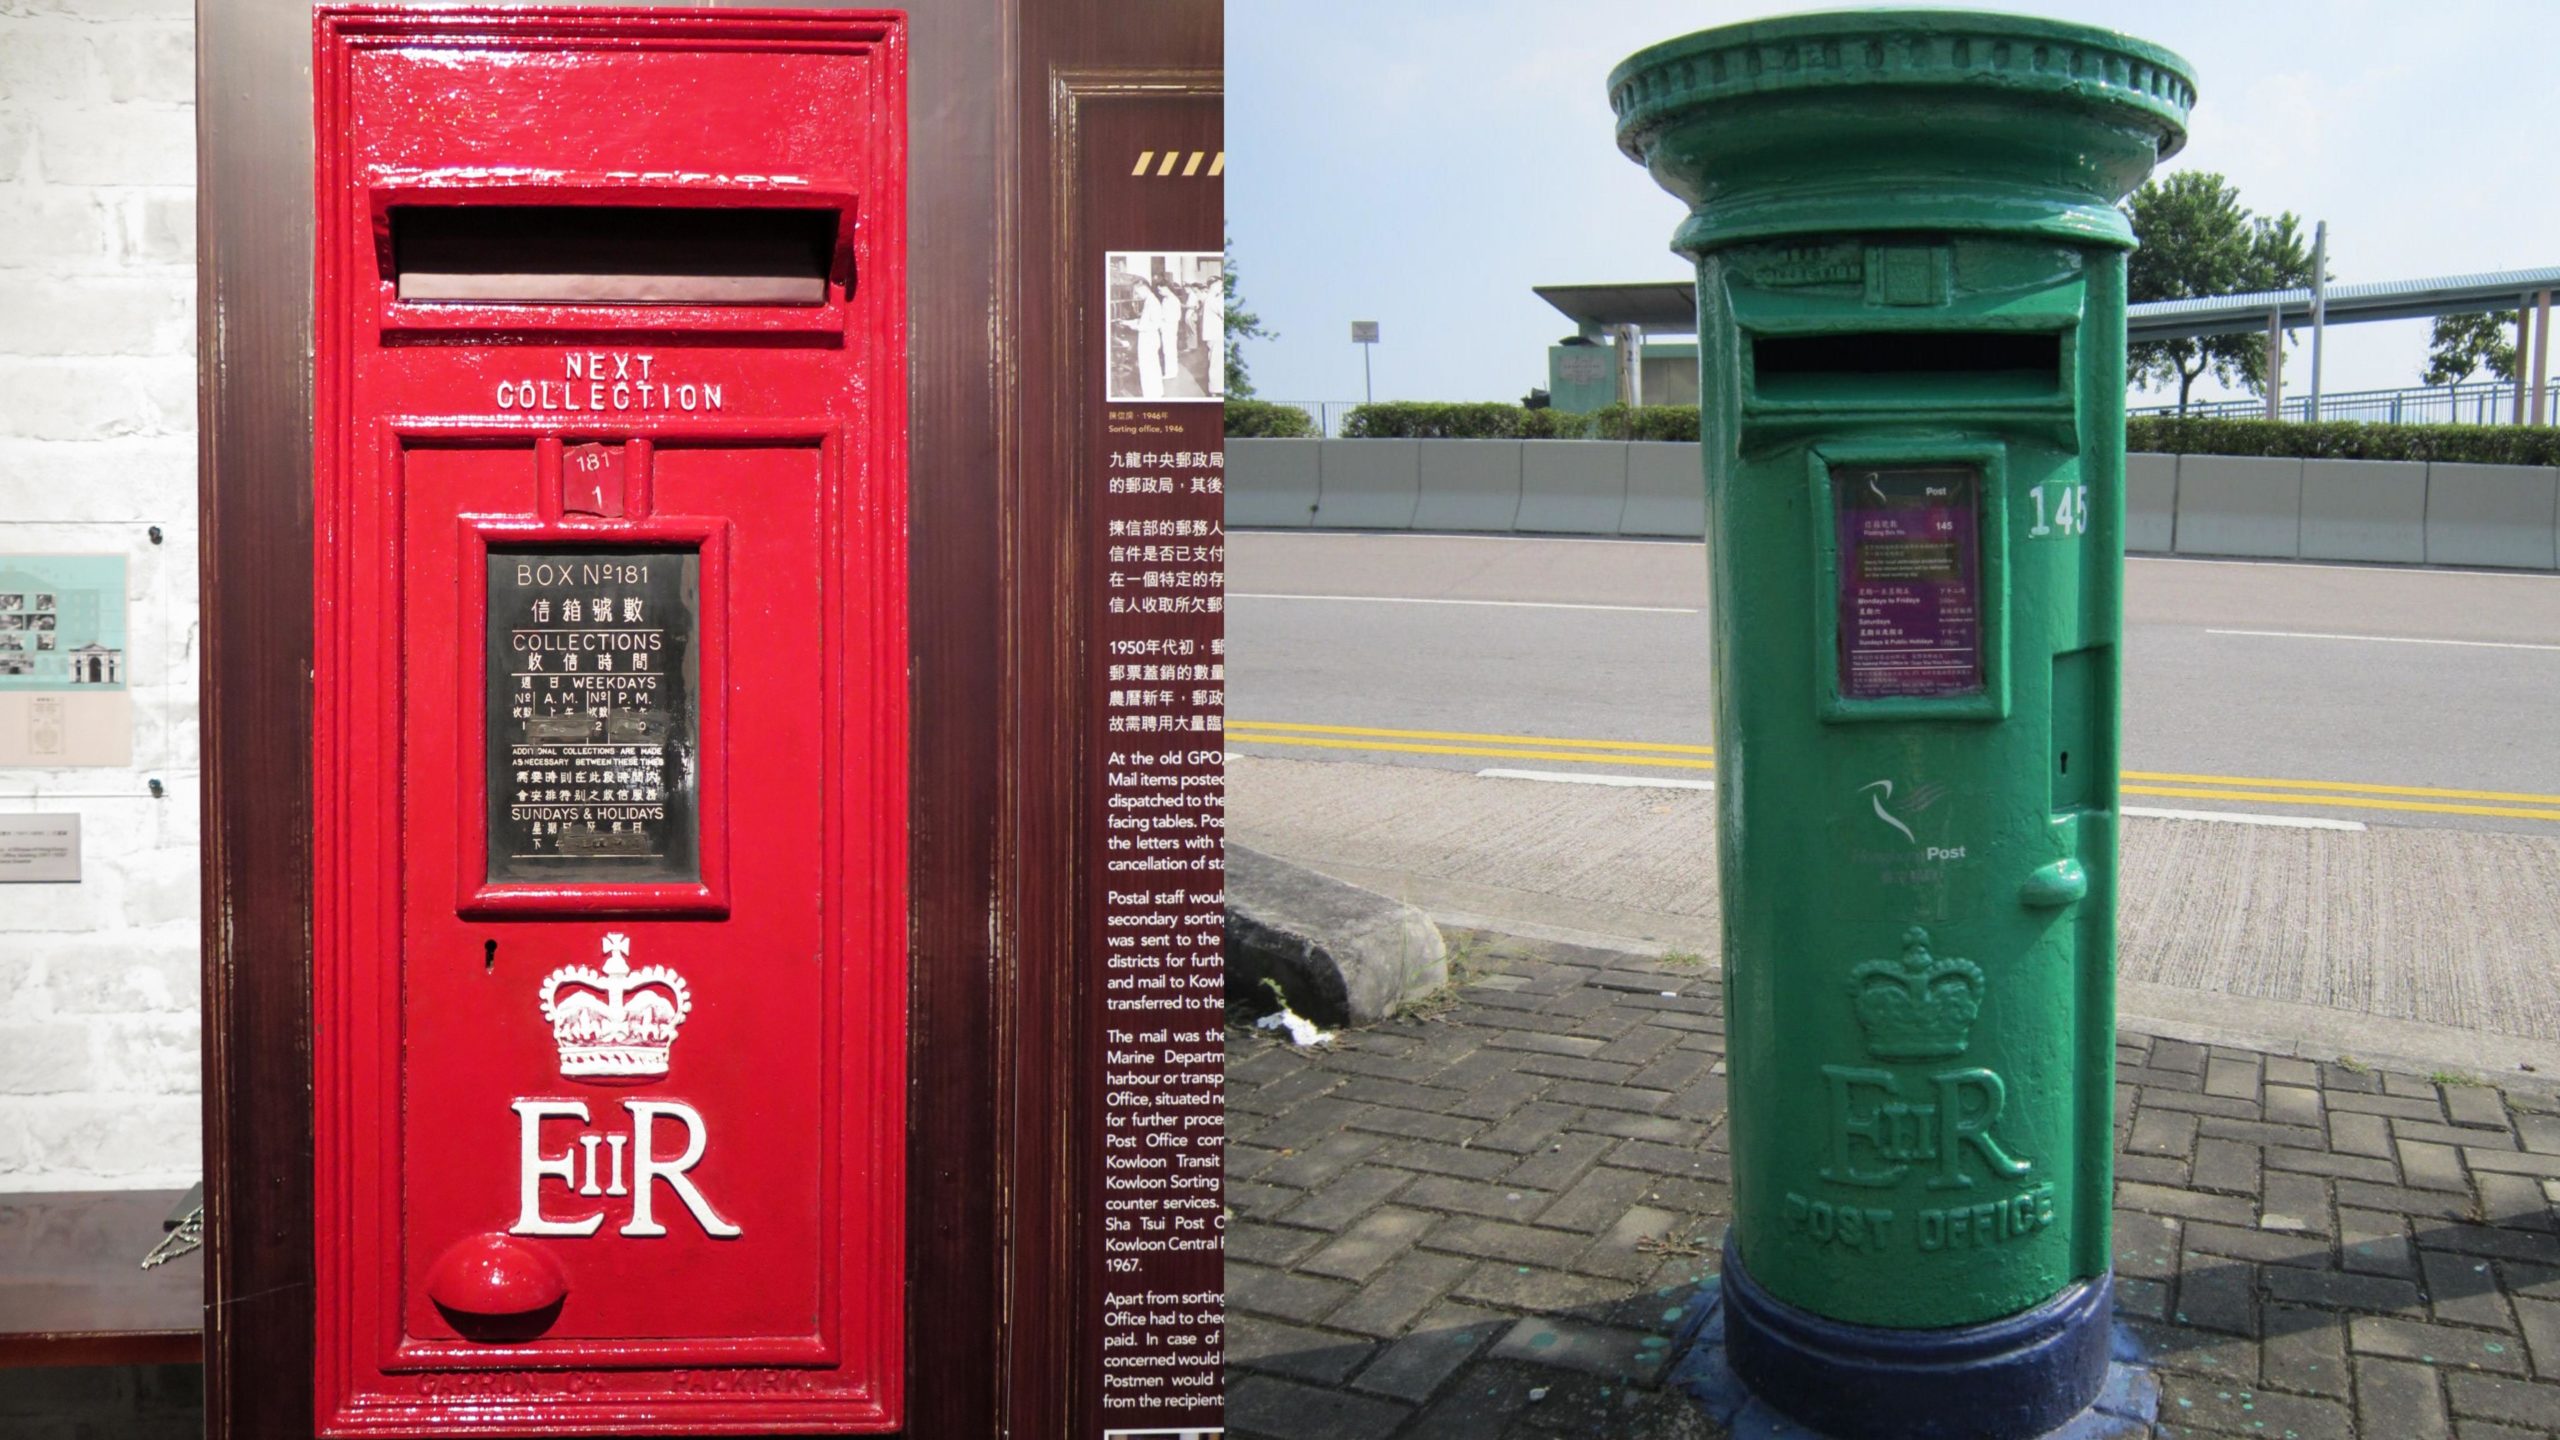 Hong Kong's pre-Handover red post boxes and post-colonial green post boxes with Queen Elizabeth II's insignia.